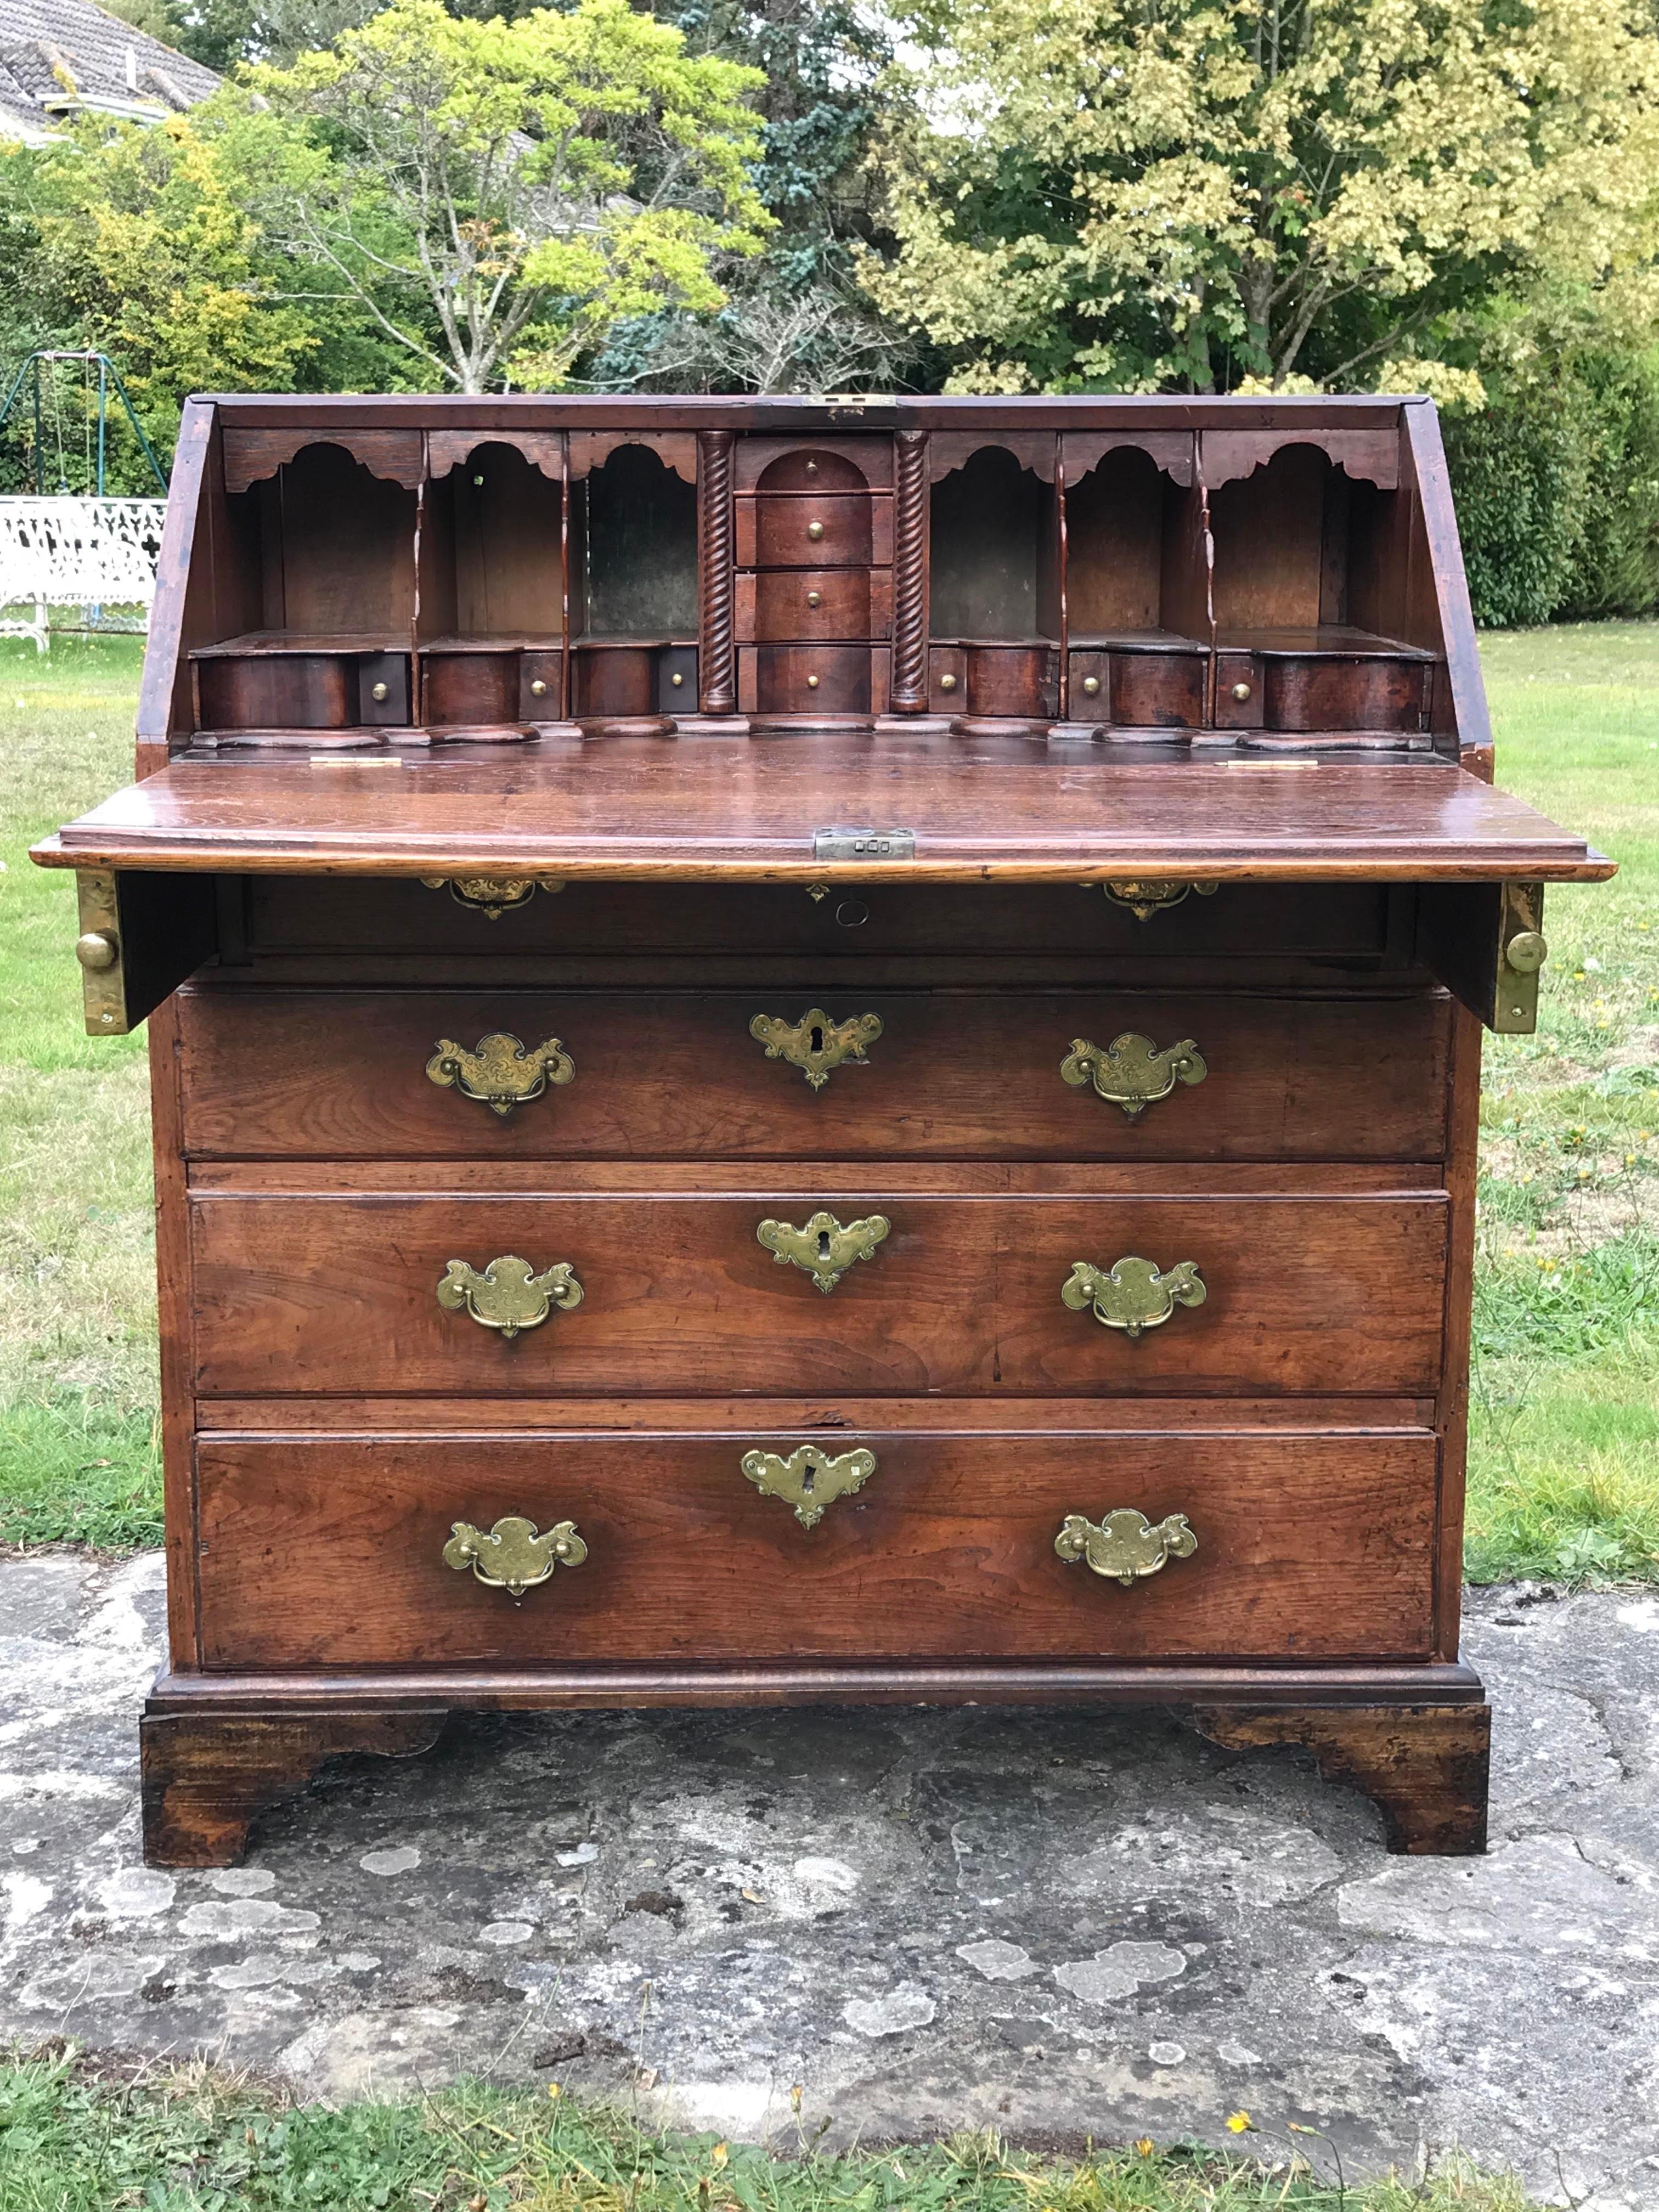 A solid walnut Georgian bureau. 
George II period, circa 1740.

This 18th-century walnut bureau retains its original engraved mounts.
Of good rich color and old patina.

It has a remarkable multi-serpentine and concave fitted interior of numerous